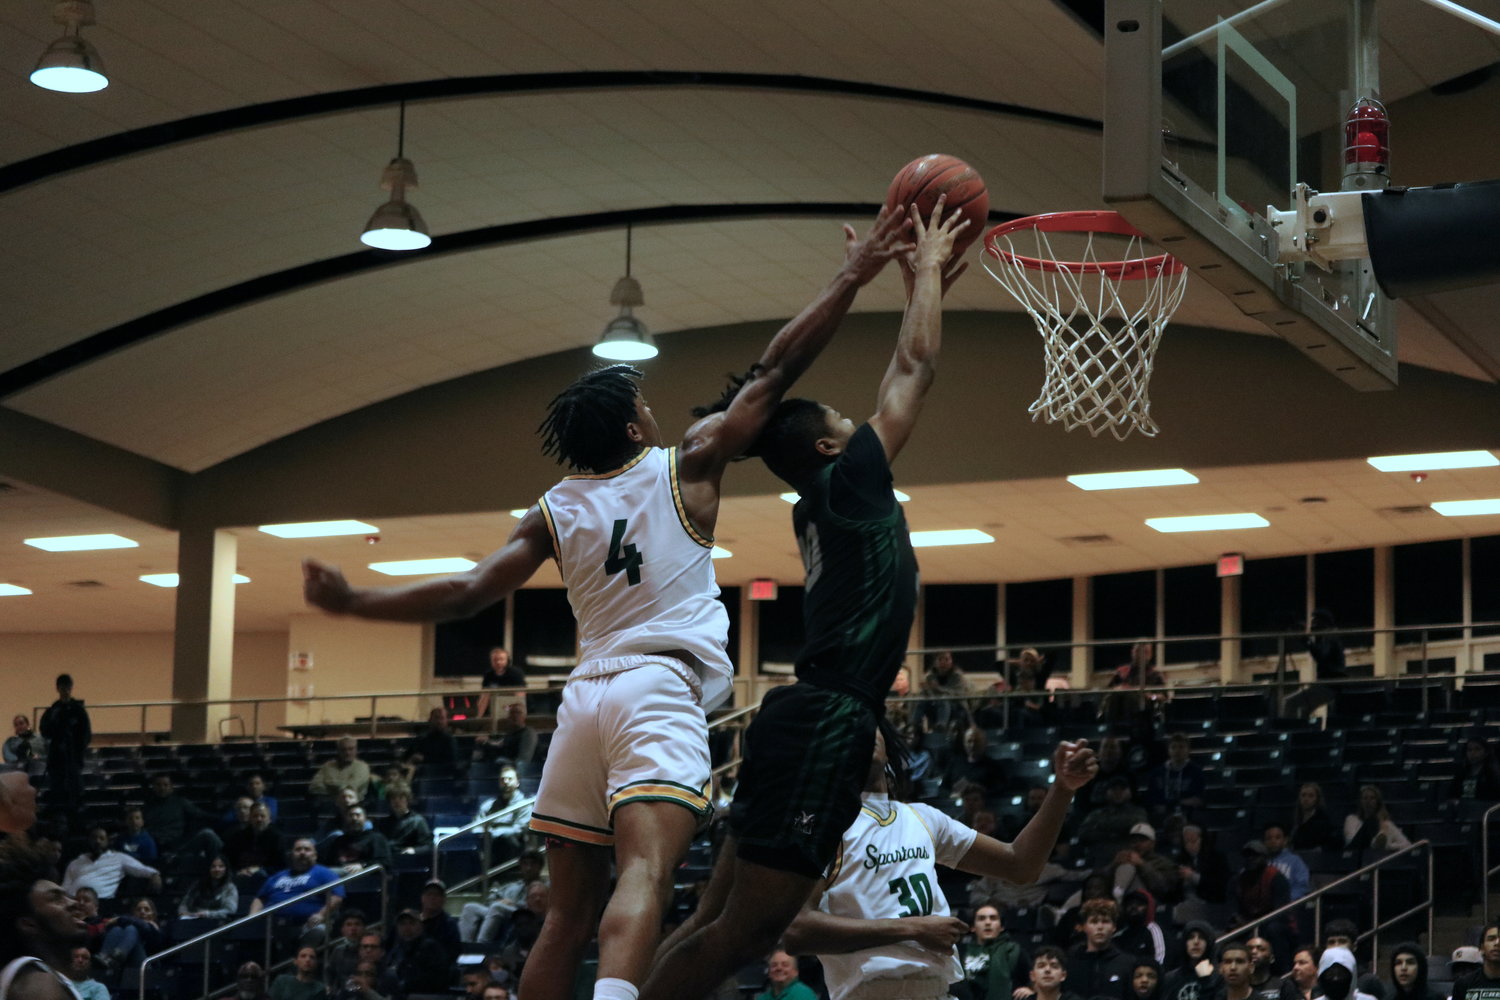 Landon Bean attempts to dunk during Friday’s game between Mayde Creek and Stratford at the Coleman Coliseum.